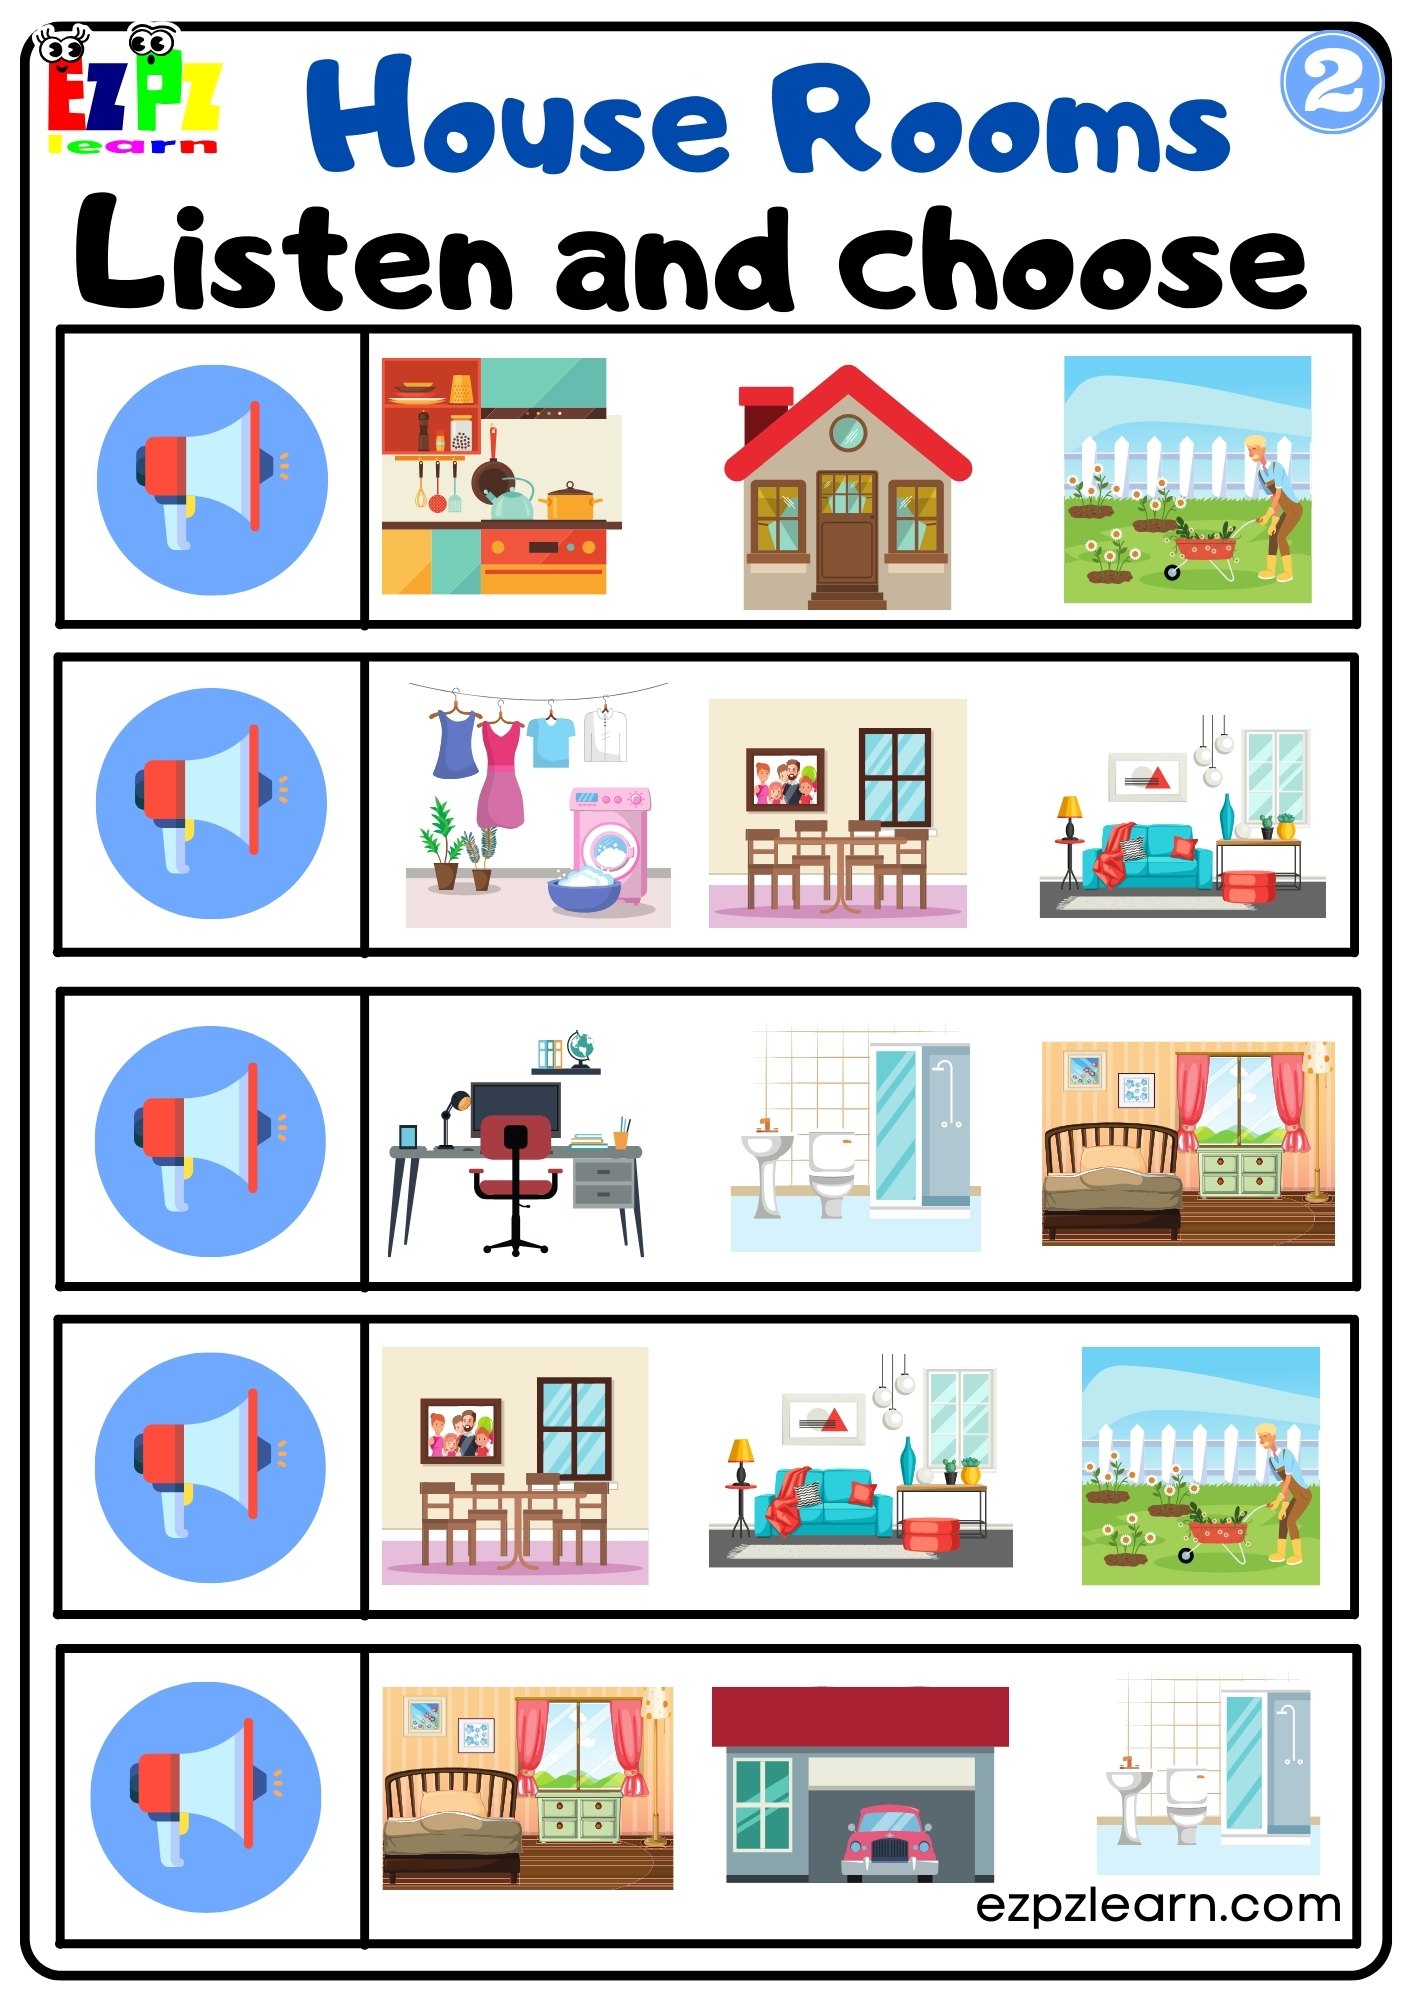 Parts Of The House - House Vocabulary In English With Pictures For